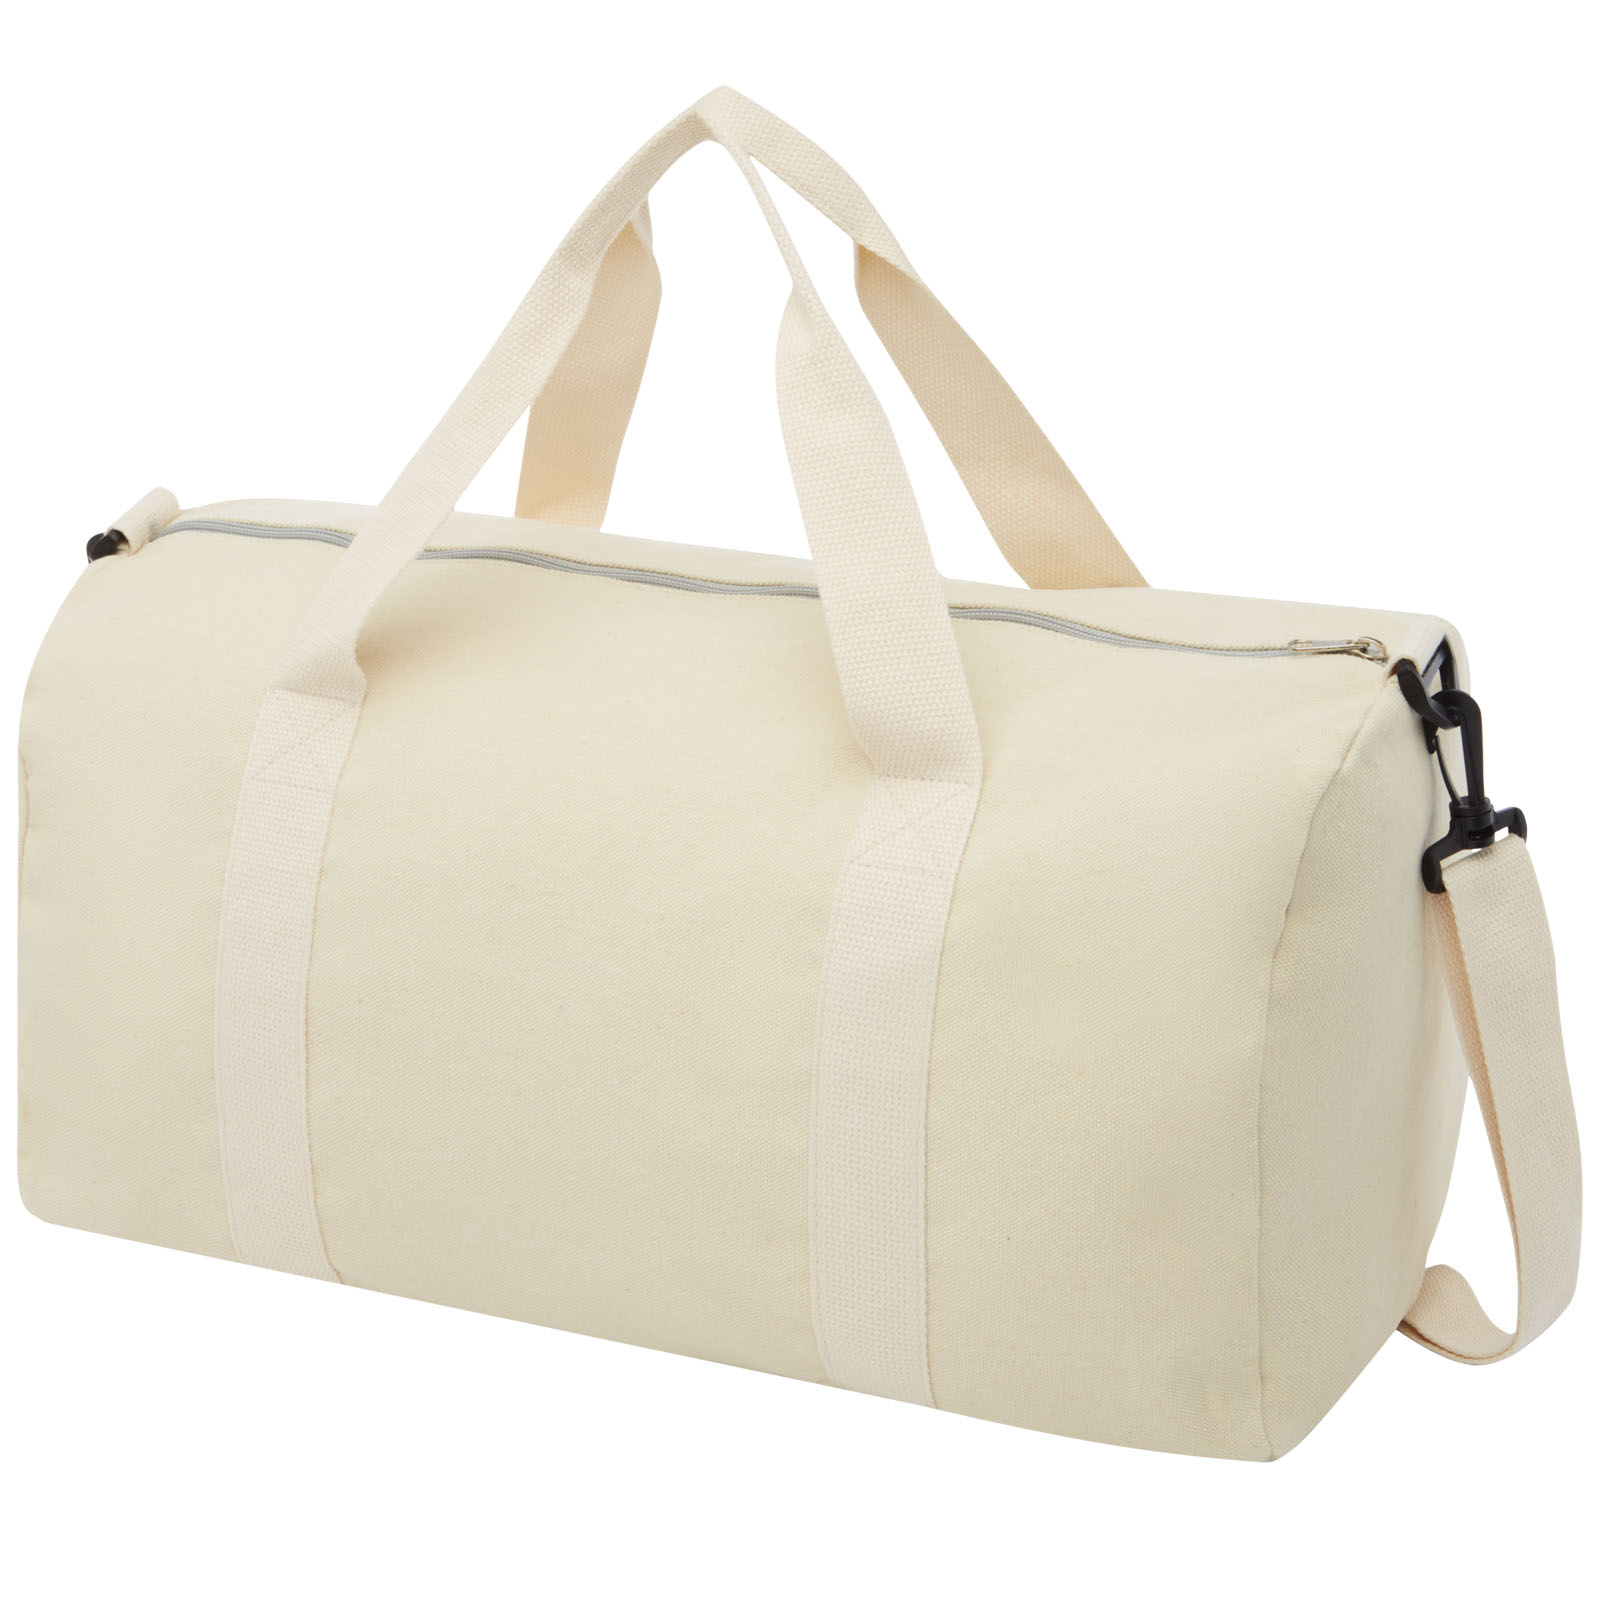 Bags - Pheebs 450 g/m² recycled cotton and polyester duffel bag 24L